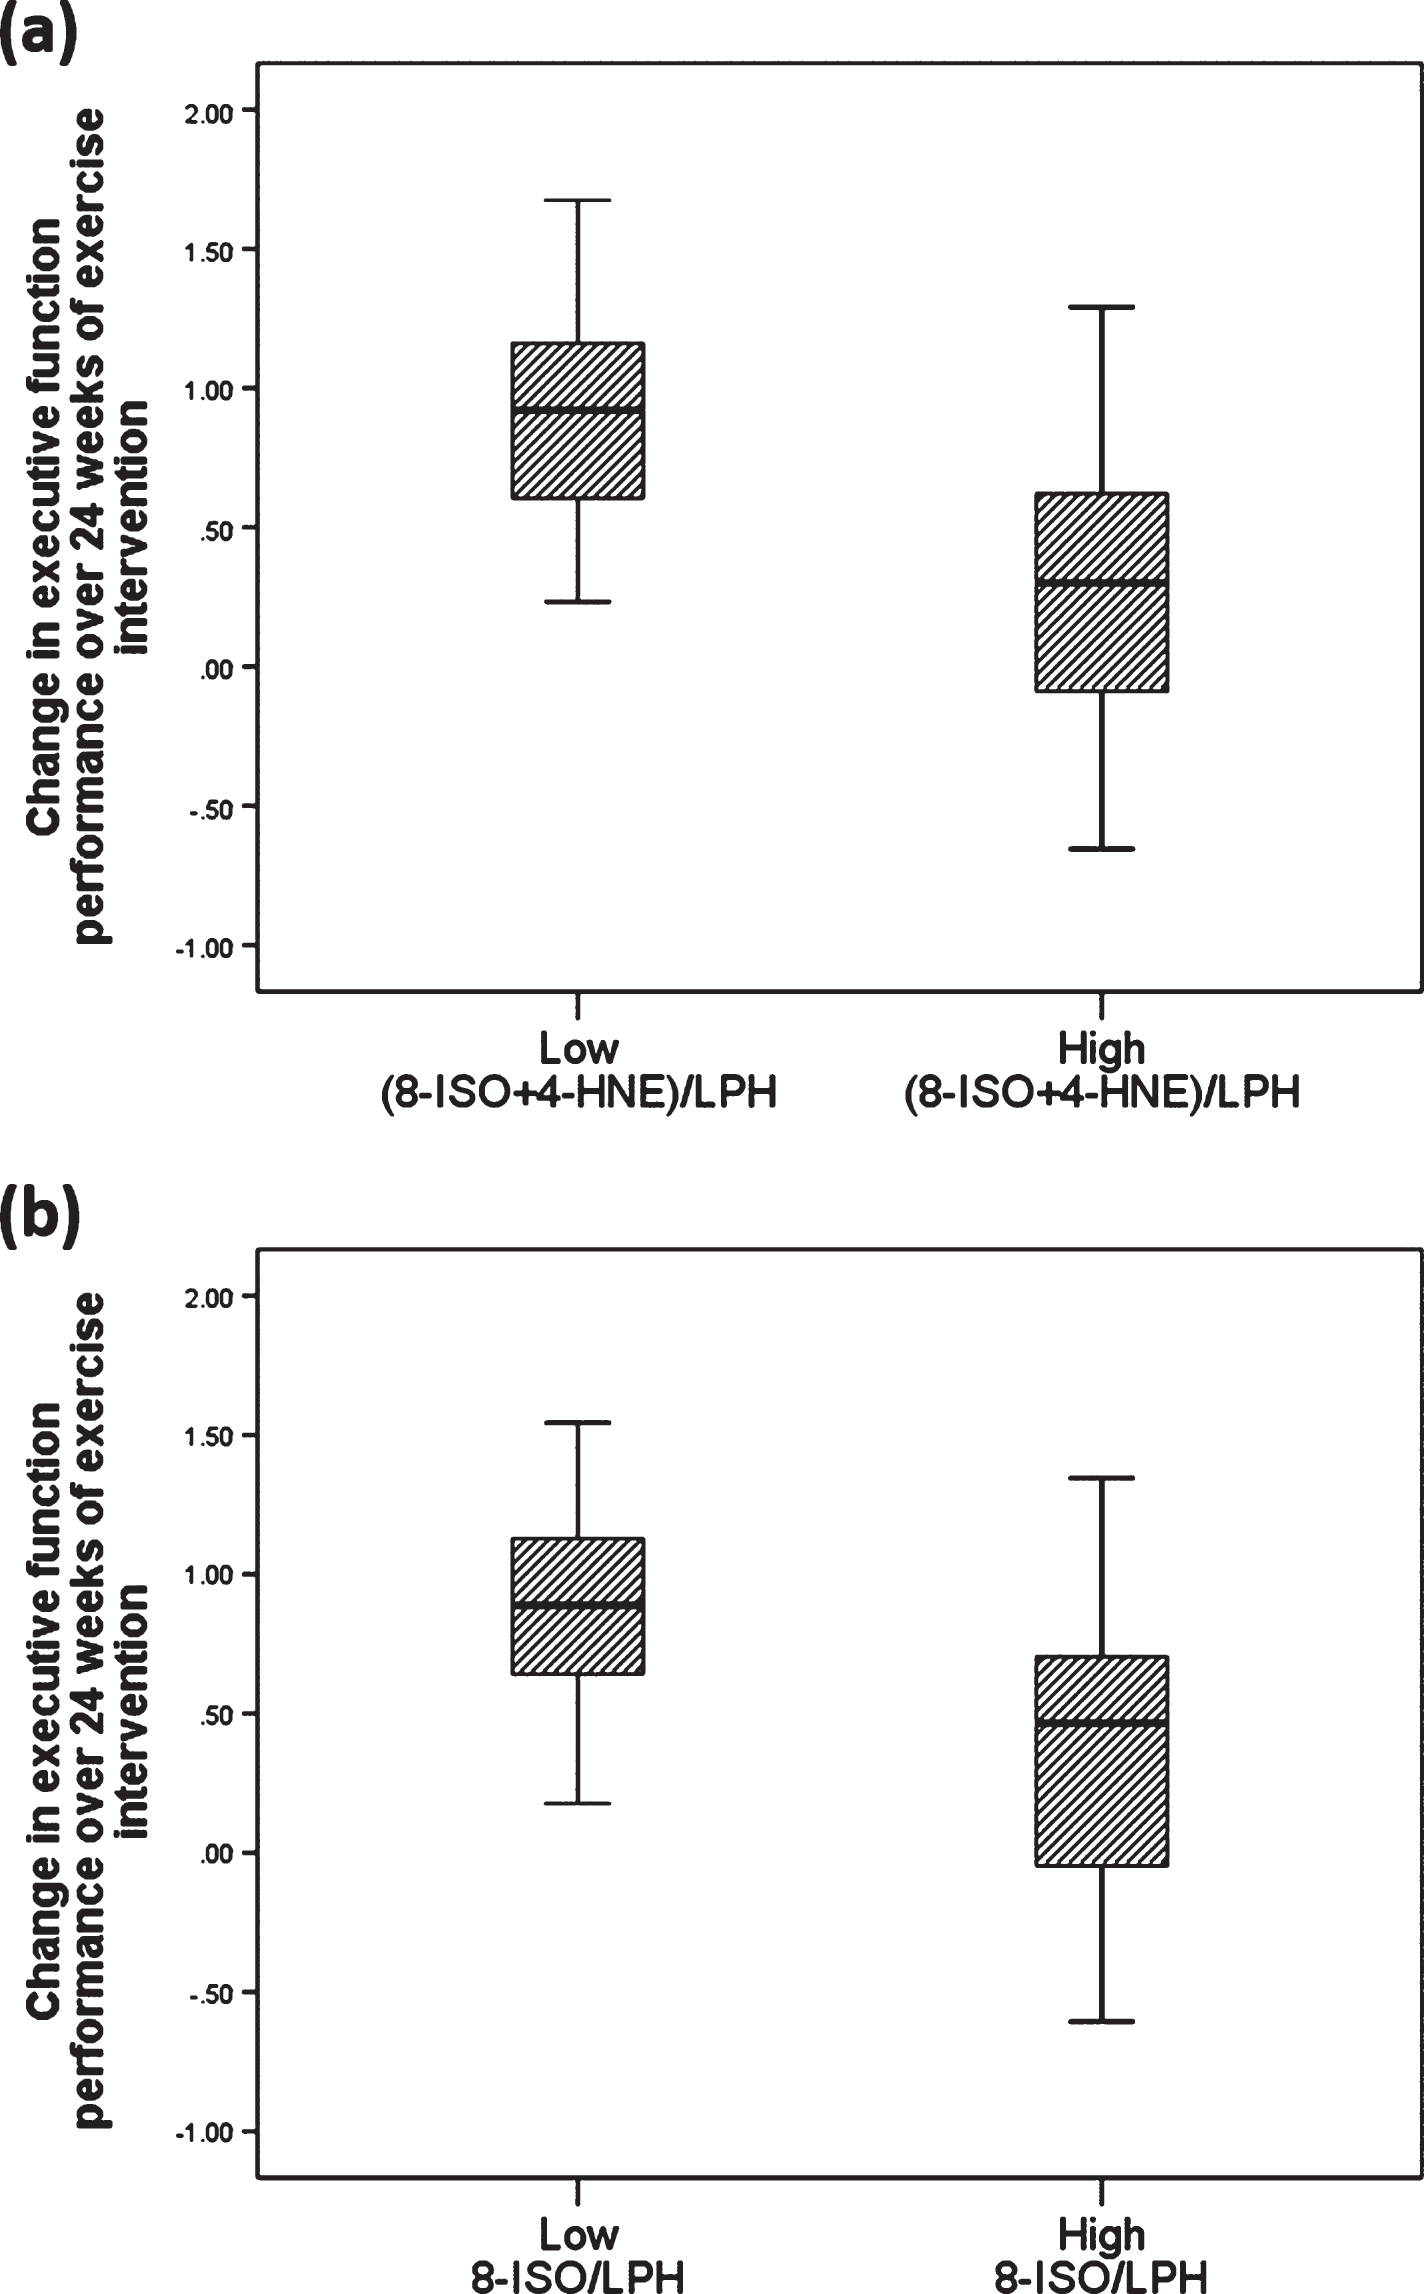 Lipid peroxidation ratios might predict the effect of exercise on cognition. Box plot displaying the distribution of the data based on median and interquartile range showing that CAD patients who had lower OS levels at baseline, as determined by overall ratio of (A) (8-ISO+4-HNE) to LPH (F (1,64) = 6.690, p = 0.012) and (B) 8-ISO to LPH (F (1, 64) = 5.965, p = 0.017), demonstrated greater improvement in executive function performance following 24 weeks of exercise intervention in a model that included baseline cognitive score, VO2 peak, BMI, sex and years of education. Values are presented as adjusted group mean±SD.